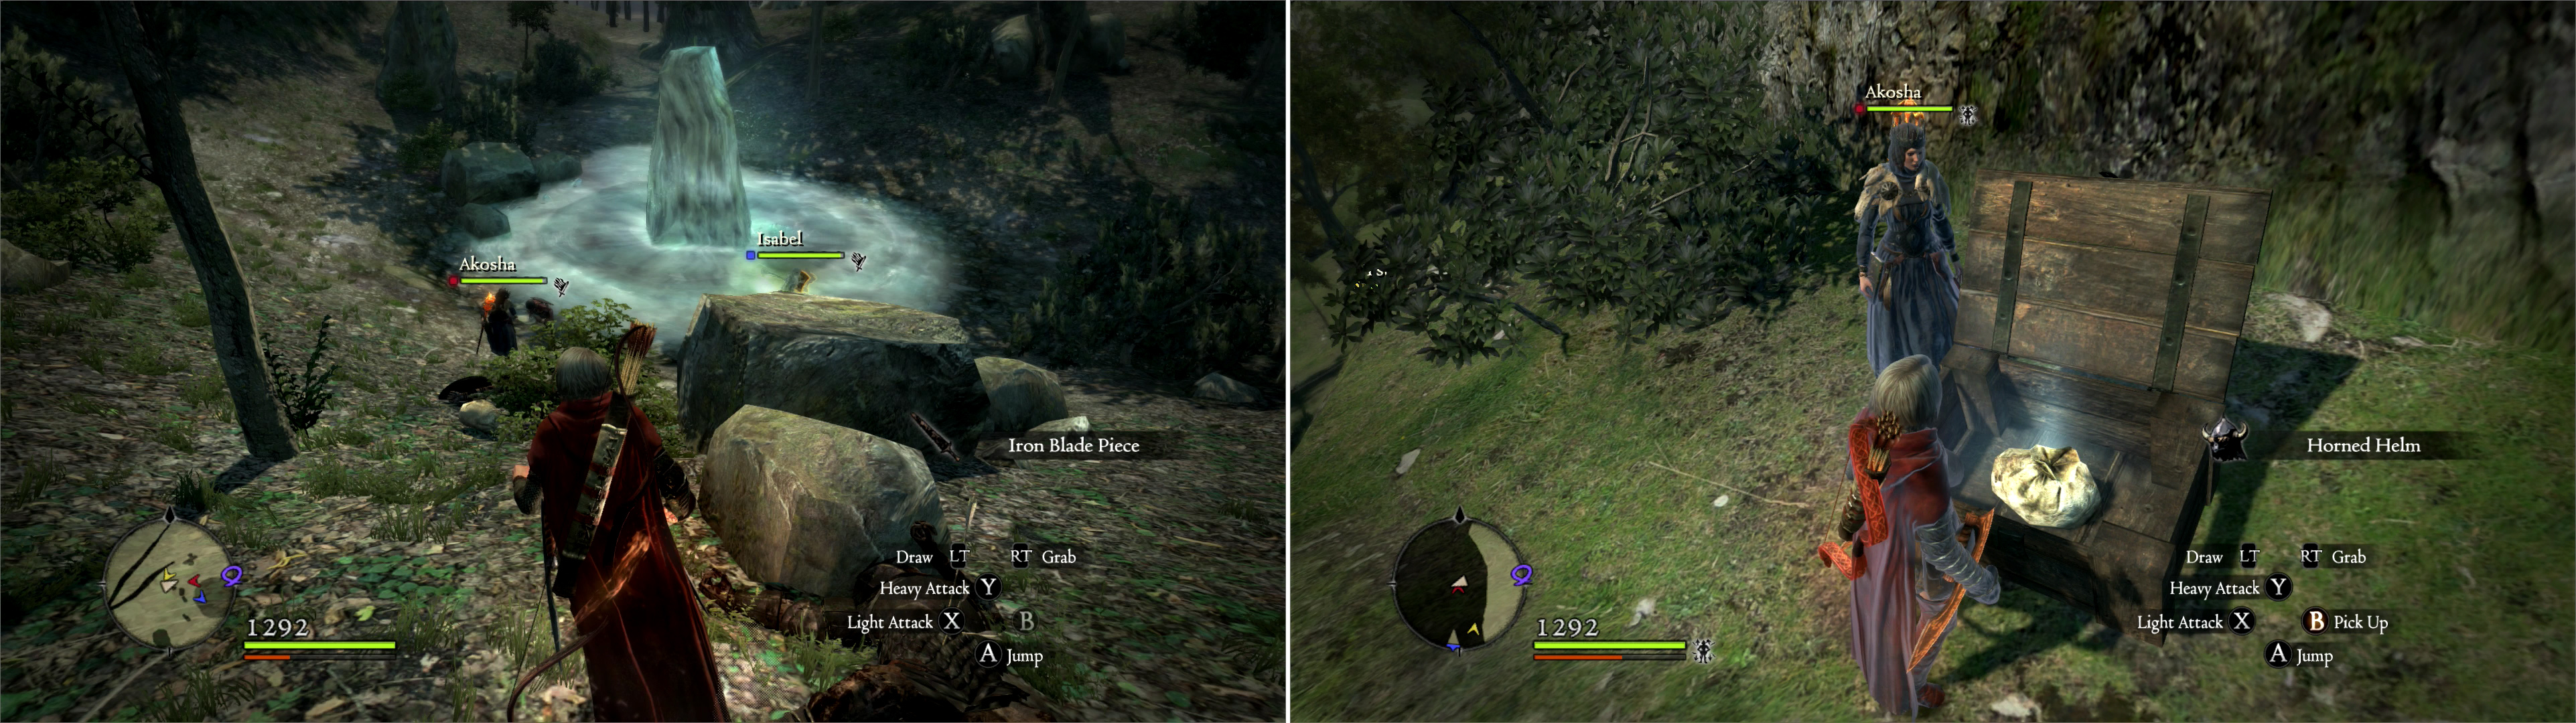 The Verda Woodlands is home to a Healing Spring, will will provide free healing (left). In the nearby cliffs you can find a chest bearing treasure (right).